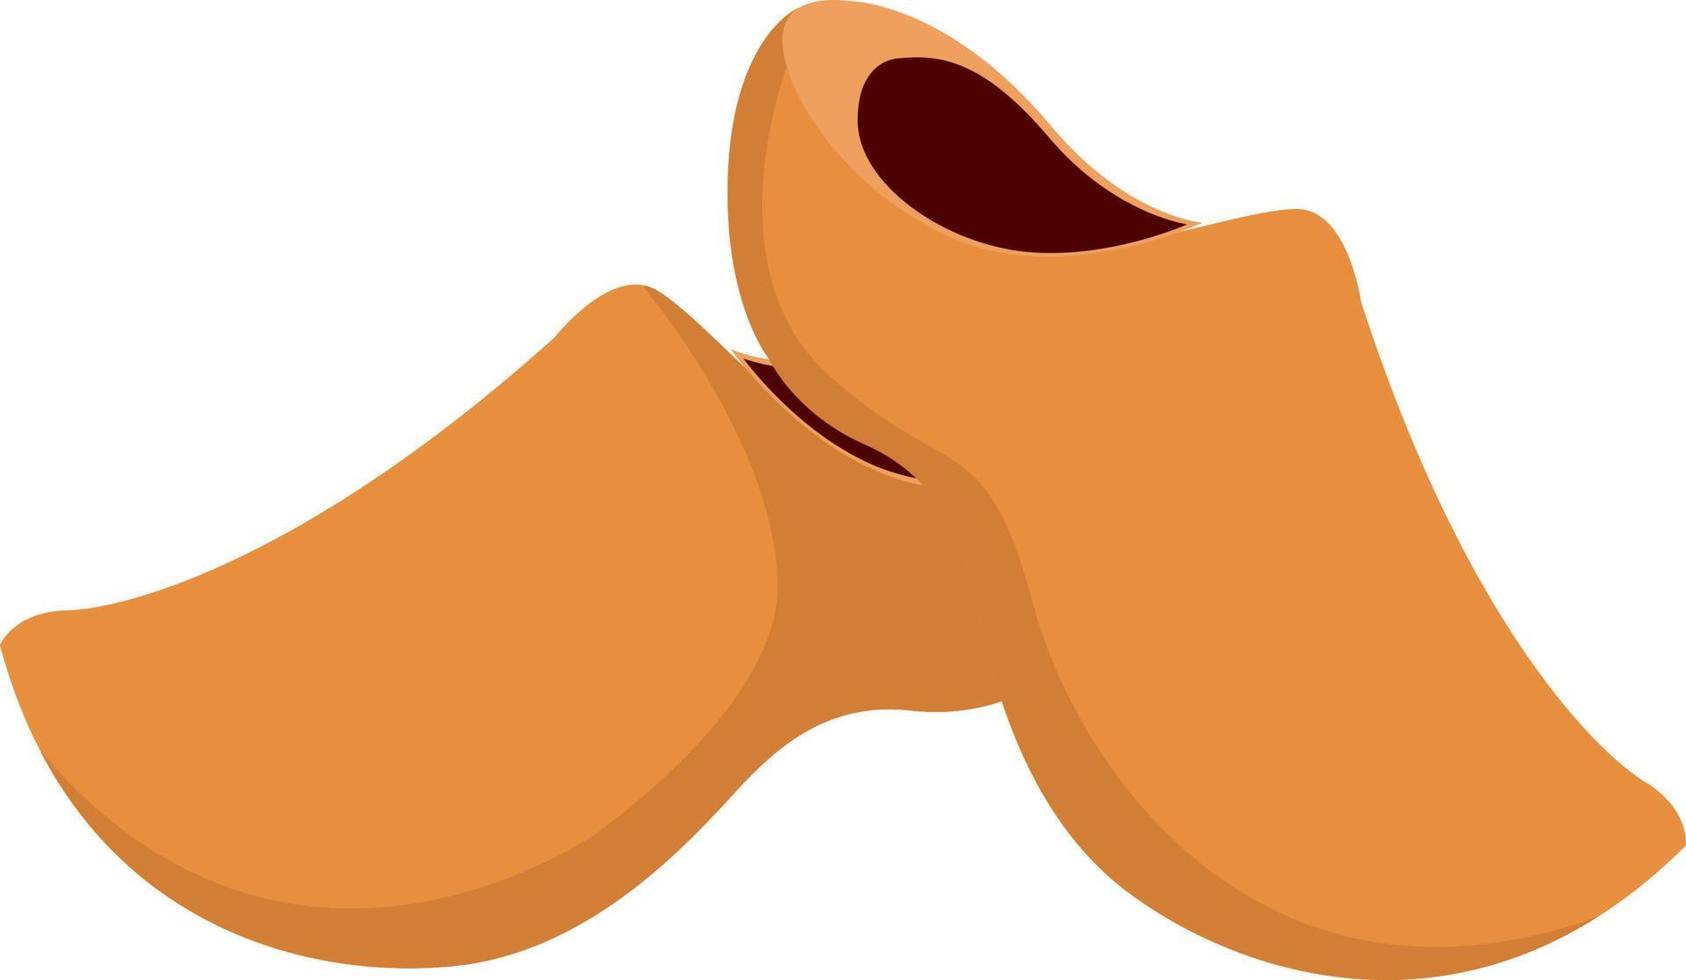 Wooden shoes, illustration, vector on white background.